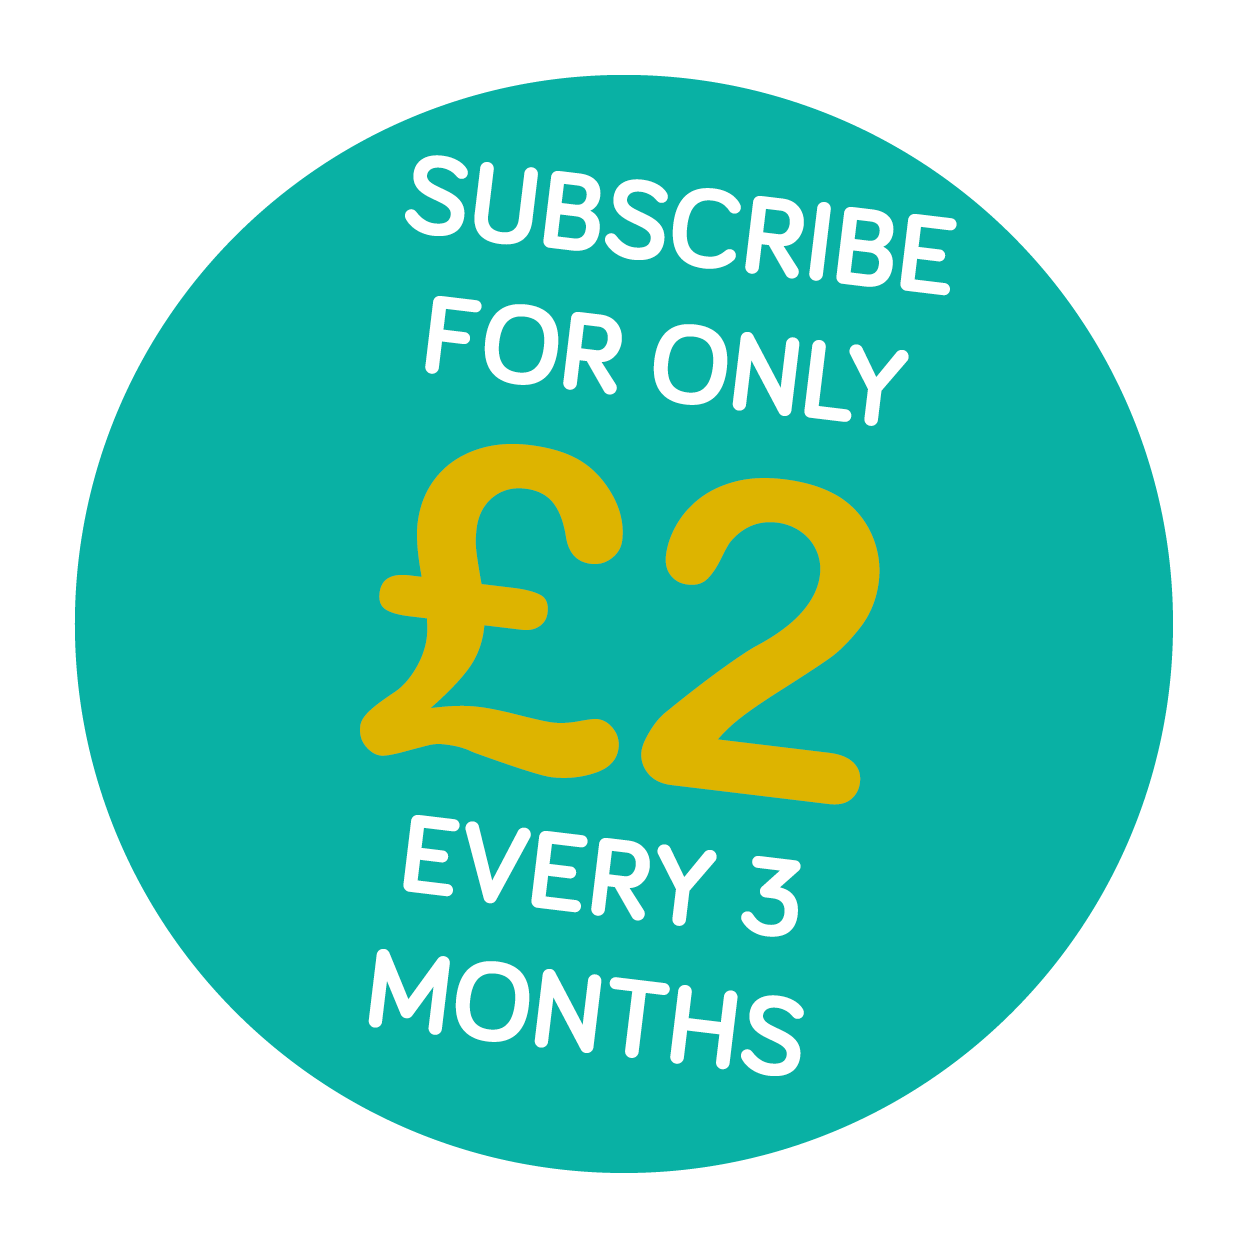 Subscribe for £2